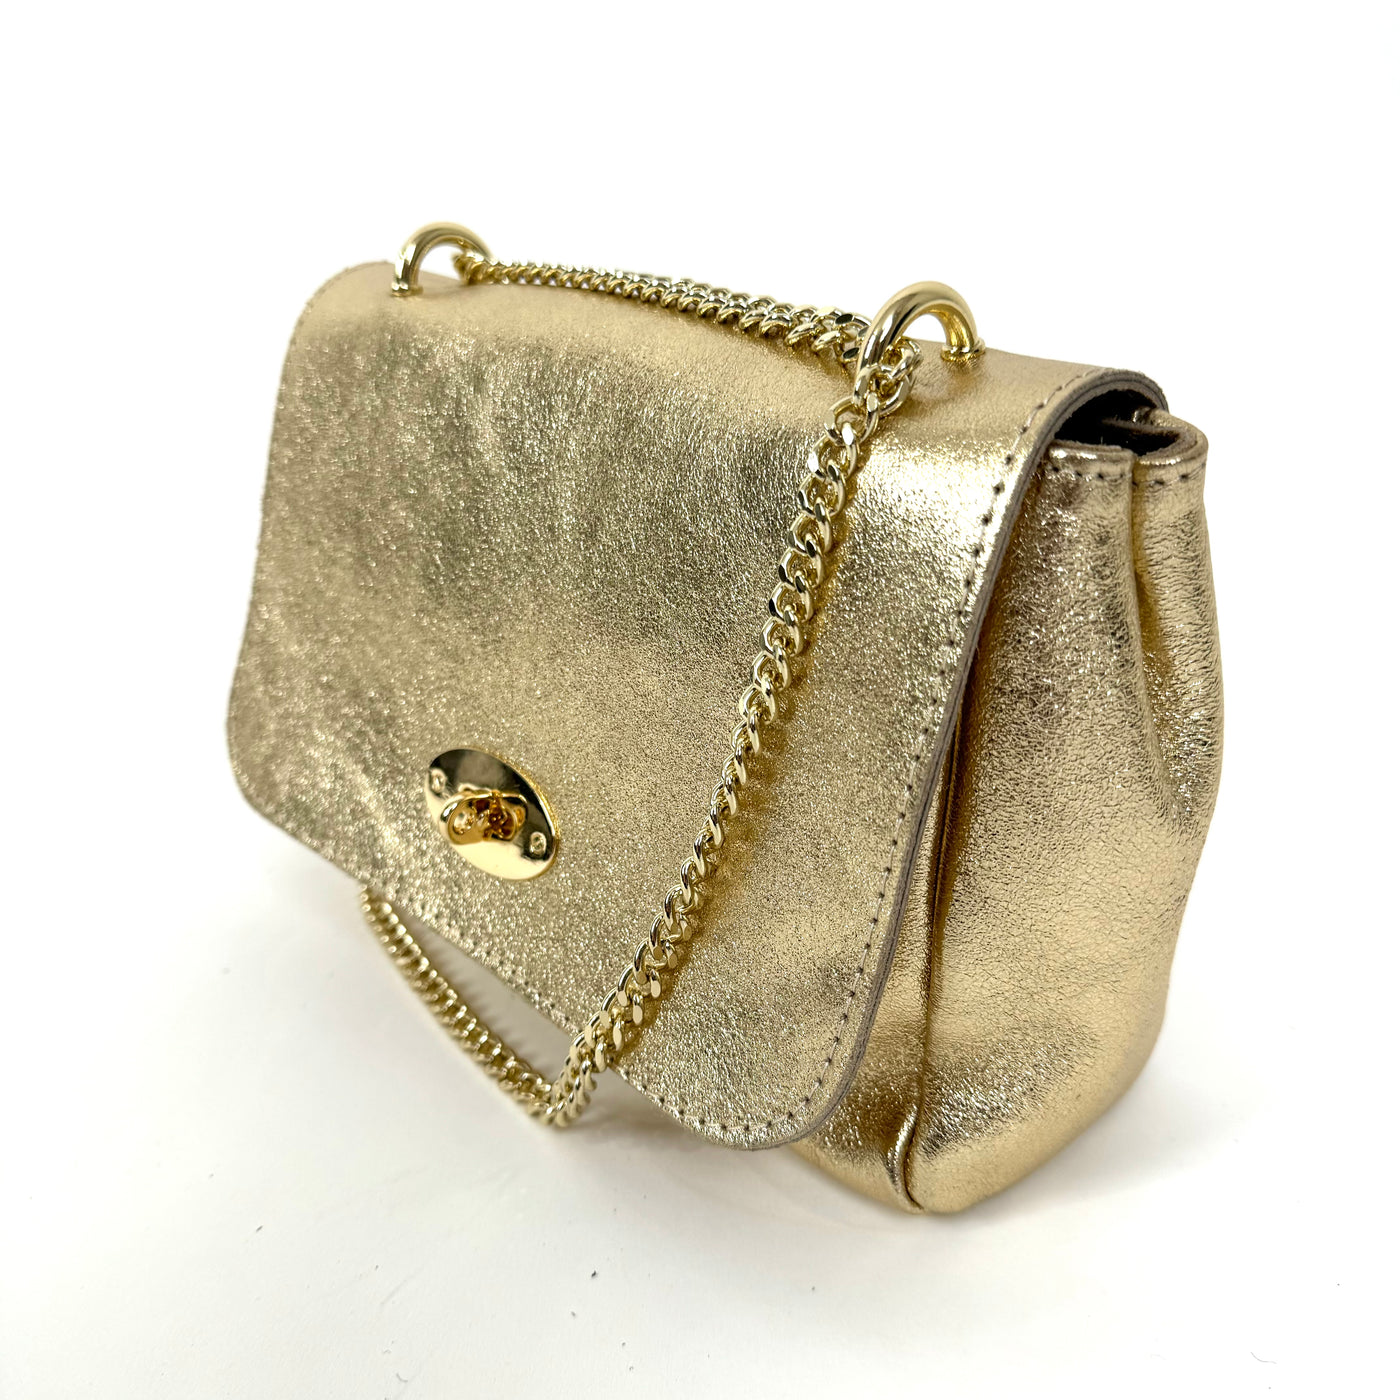 Hollywood Gold Chain Bag